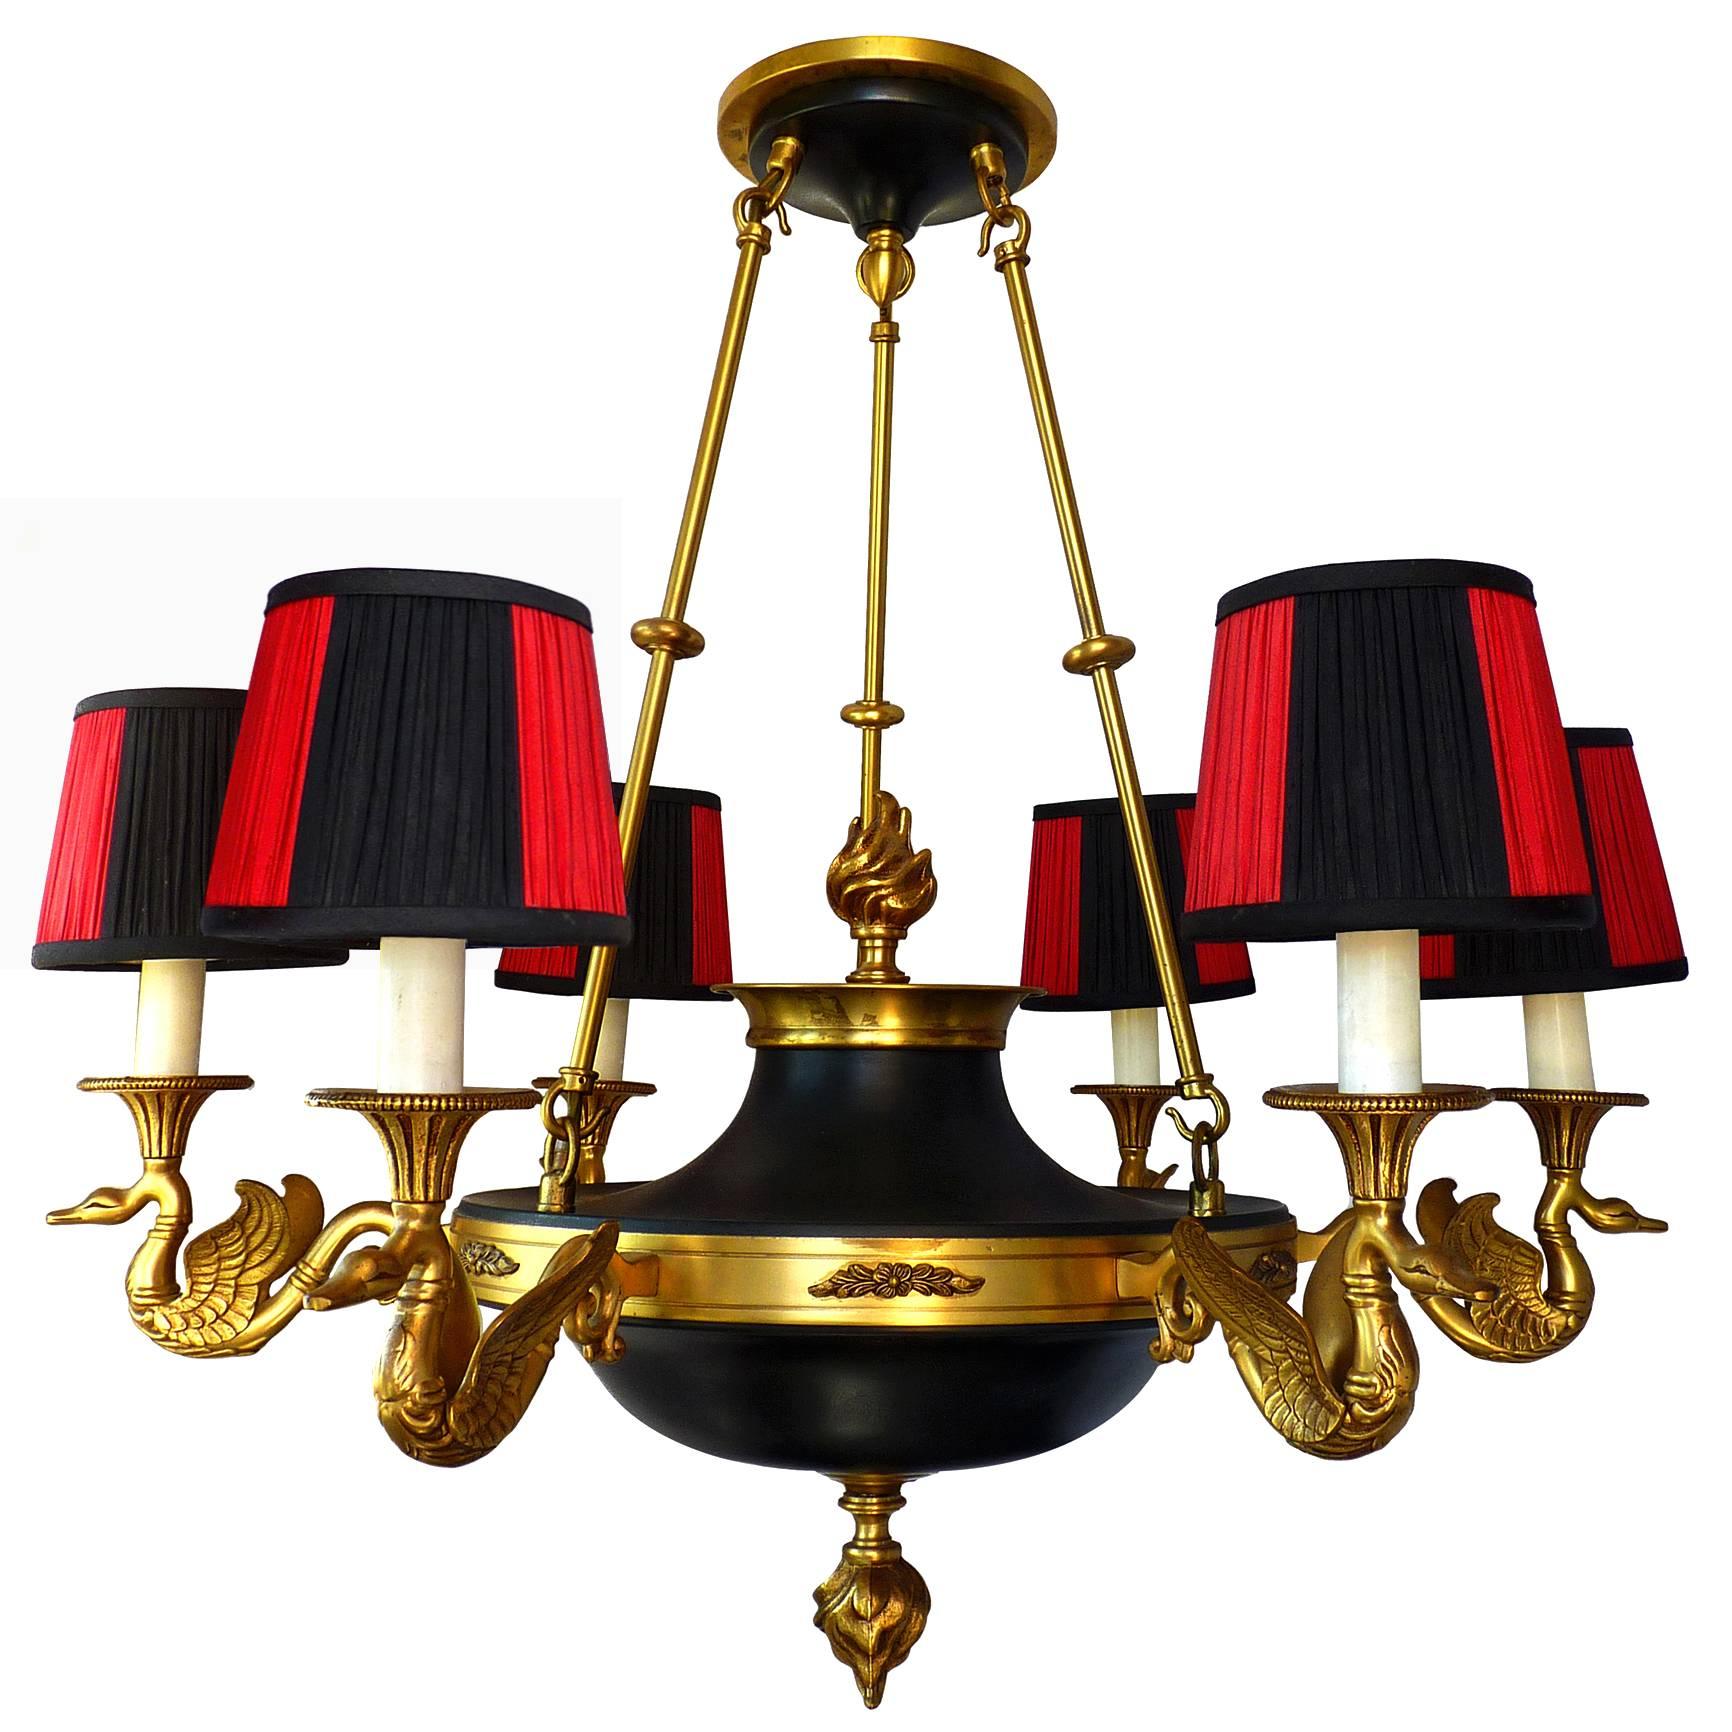 20th Century Gilt Bronze French Empire Chandelier, 6 Swan Arms and Red and Black Lampshades